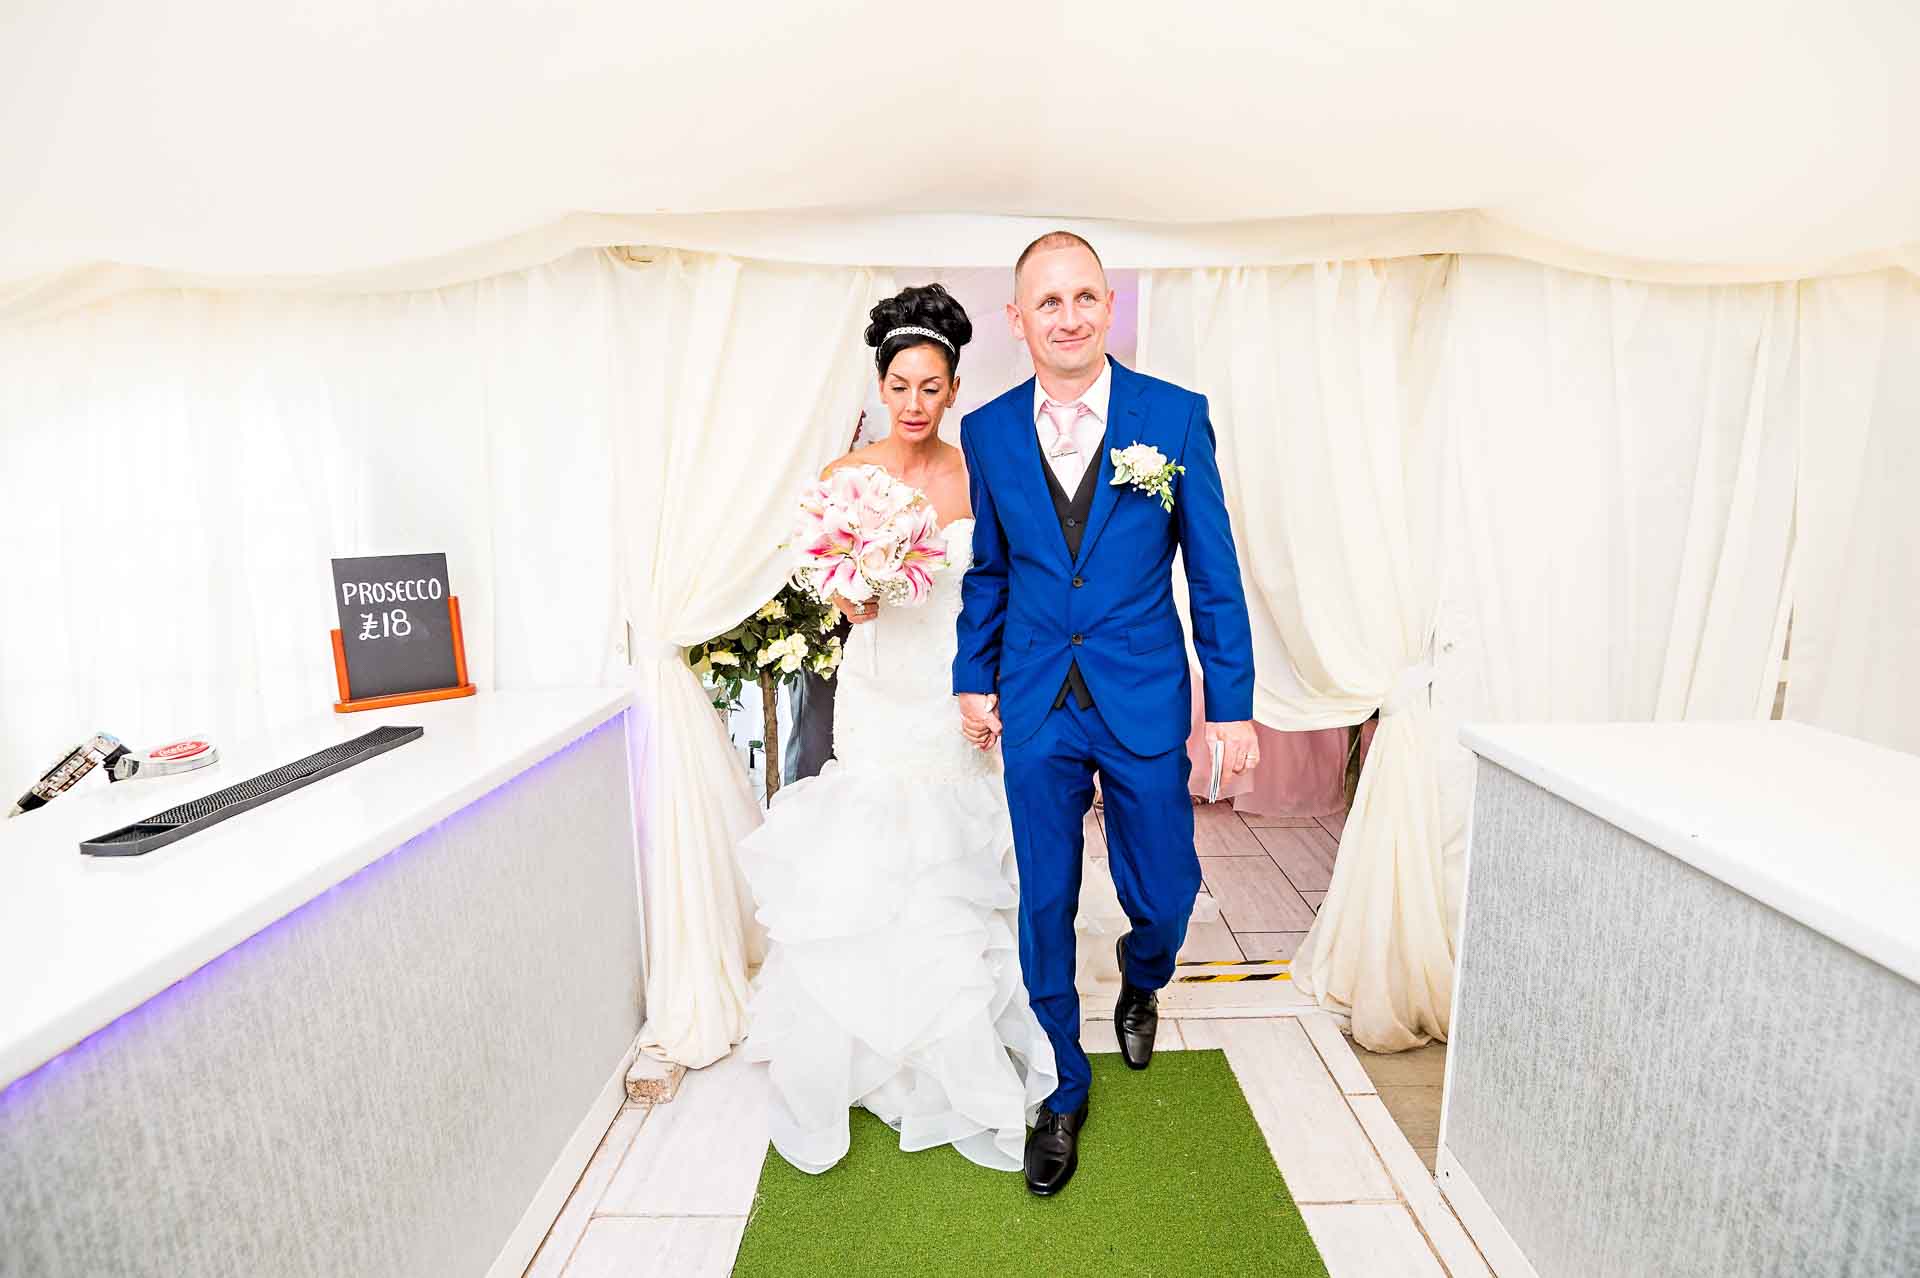 The bride and groom leave their wedding ceremony in Marquee at Ridgeway Golf Club through the bar